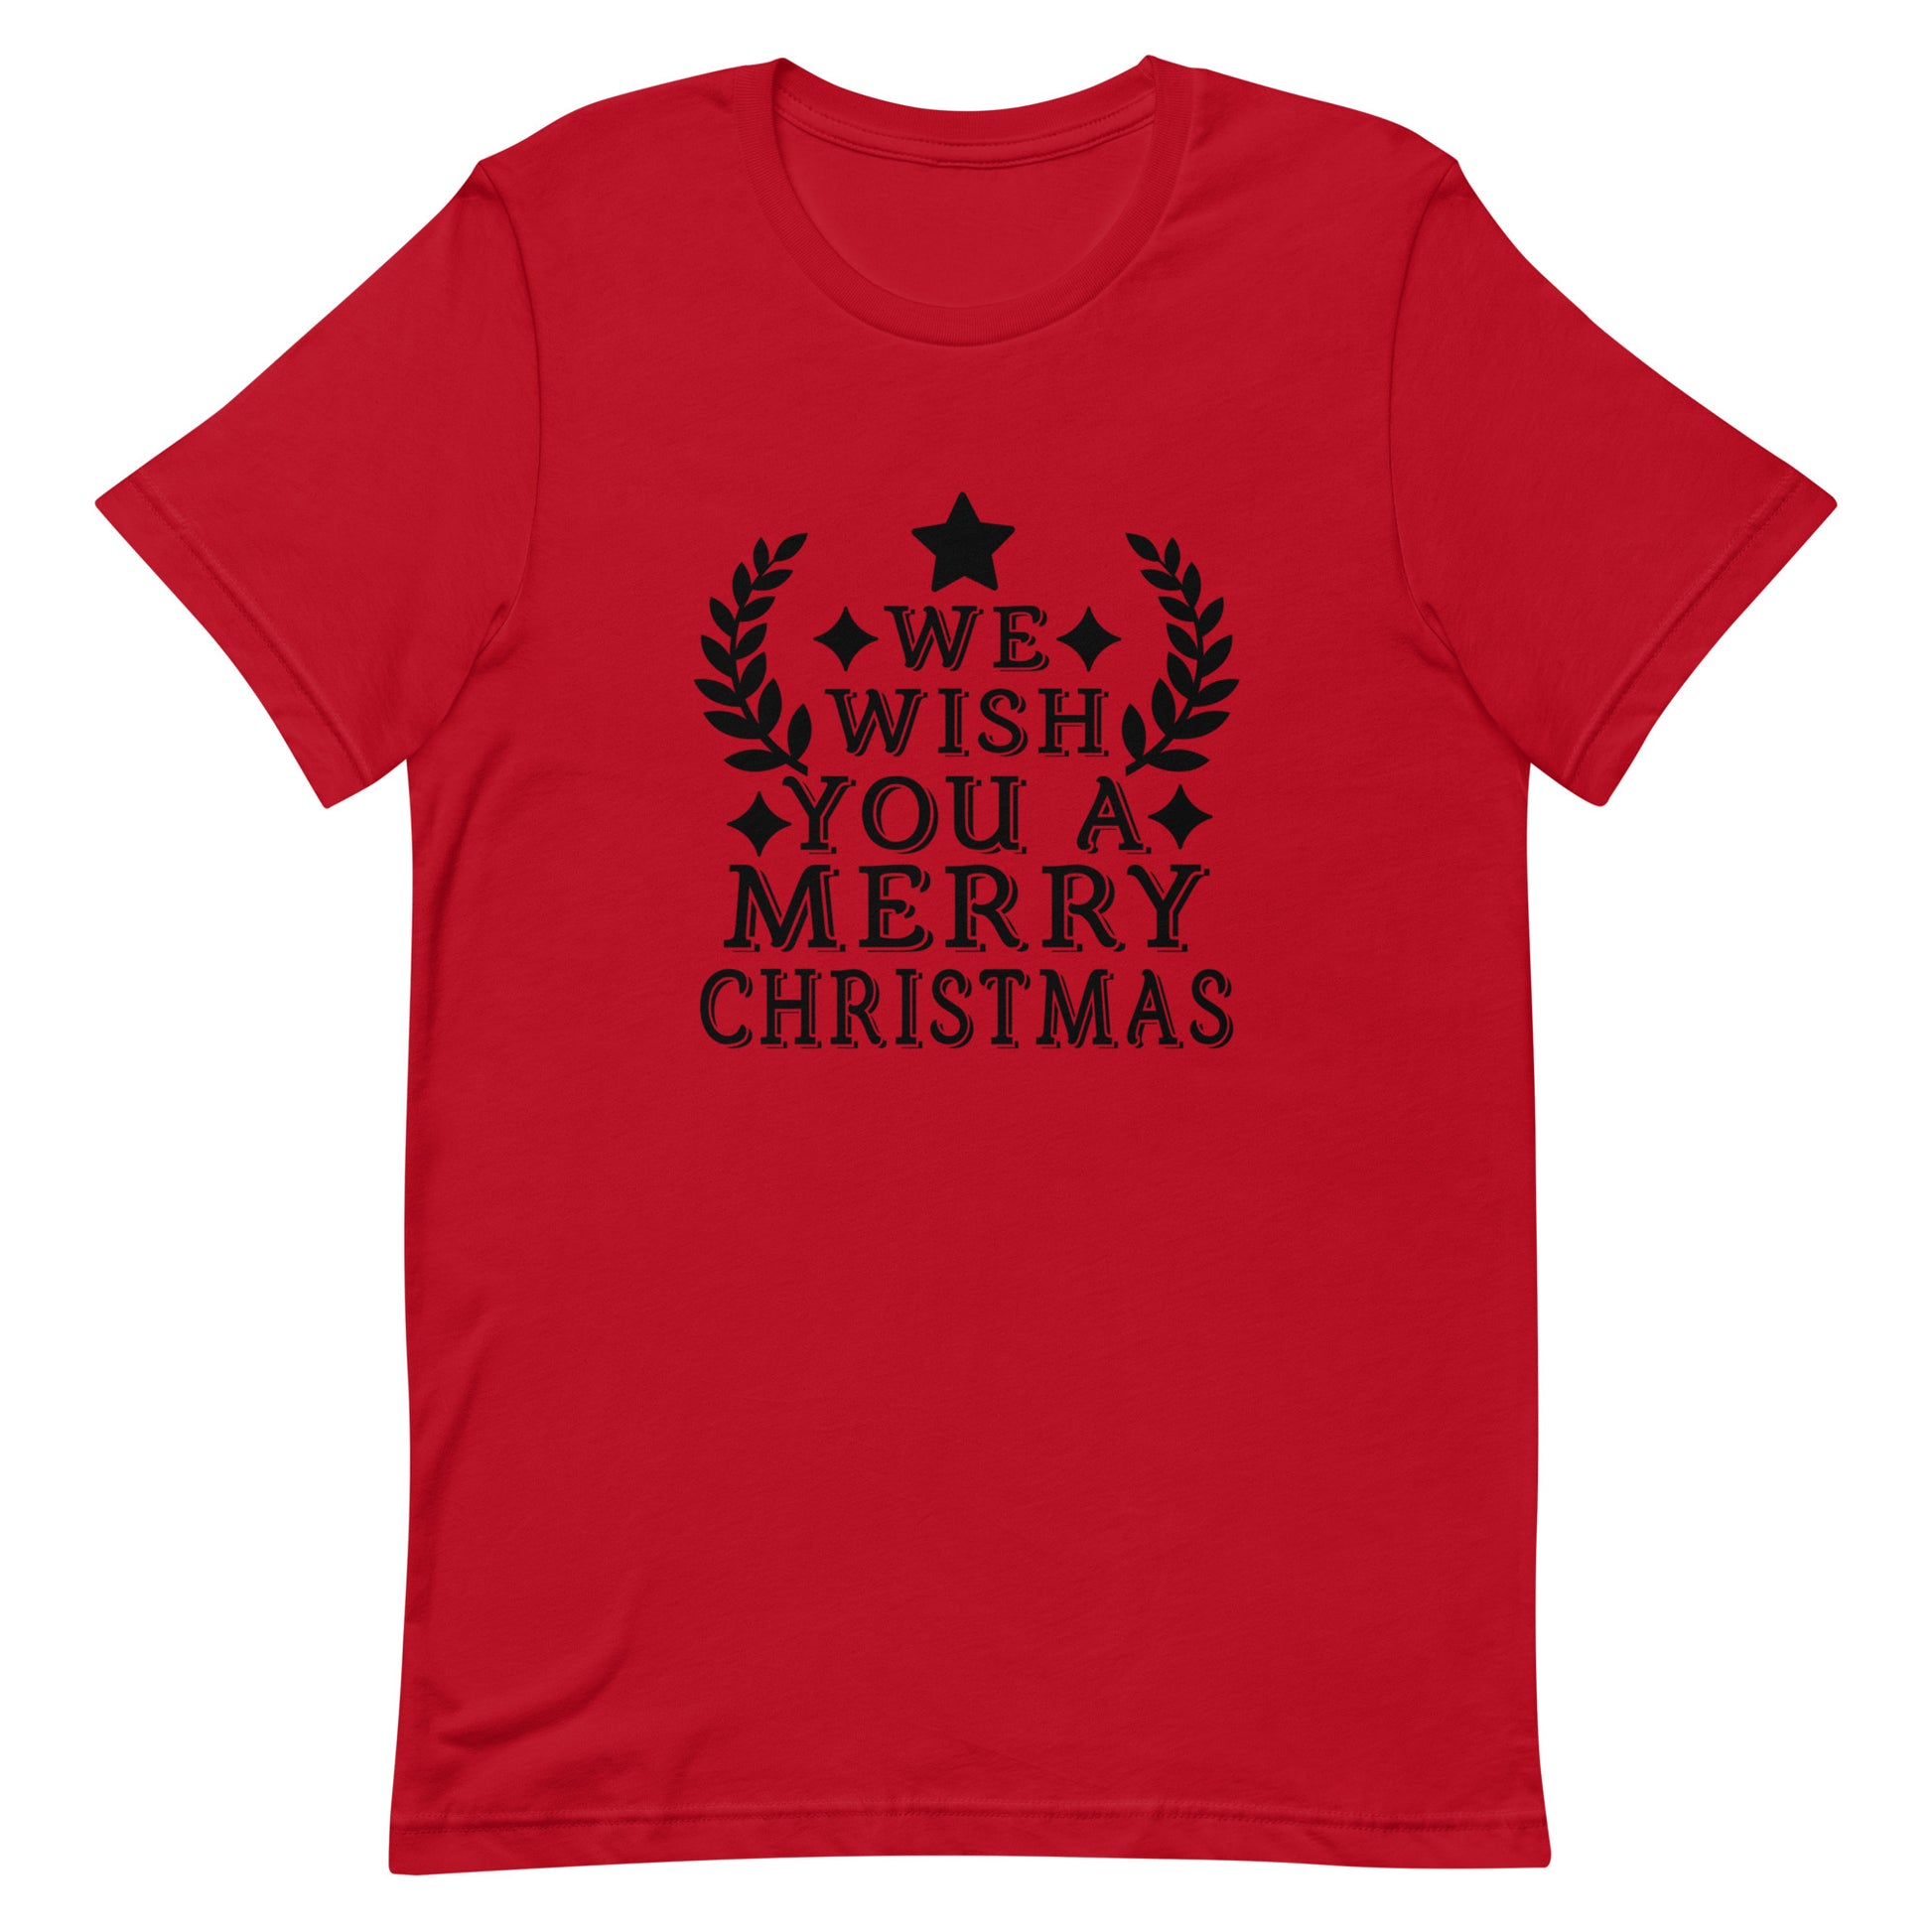 We Wish You a Merry Christmas Unisex t-shirt